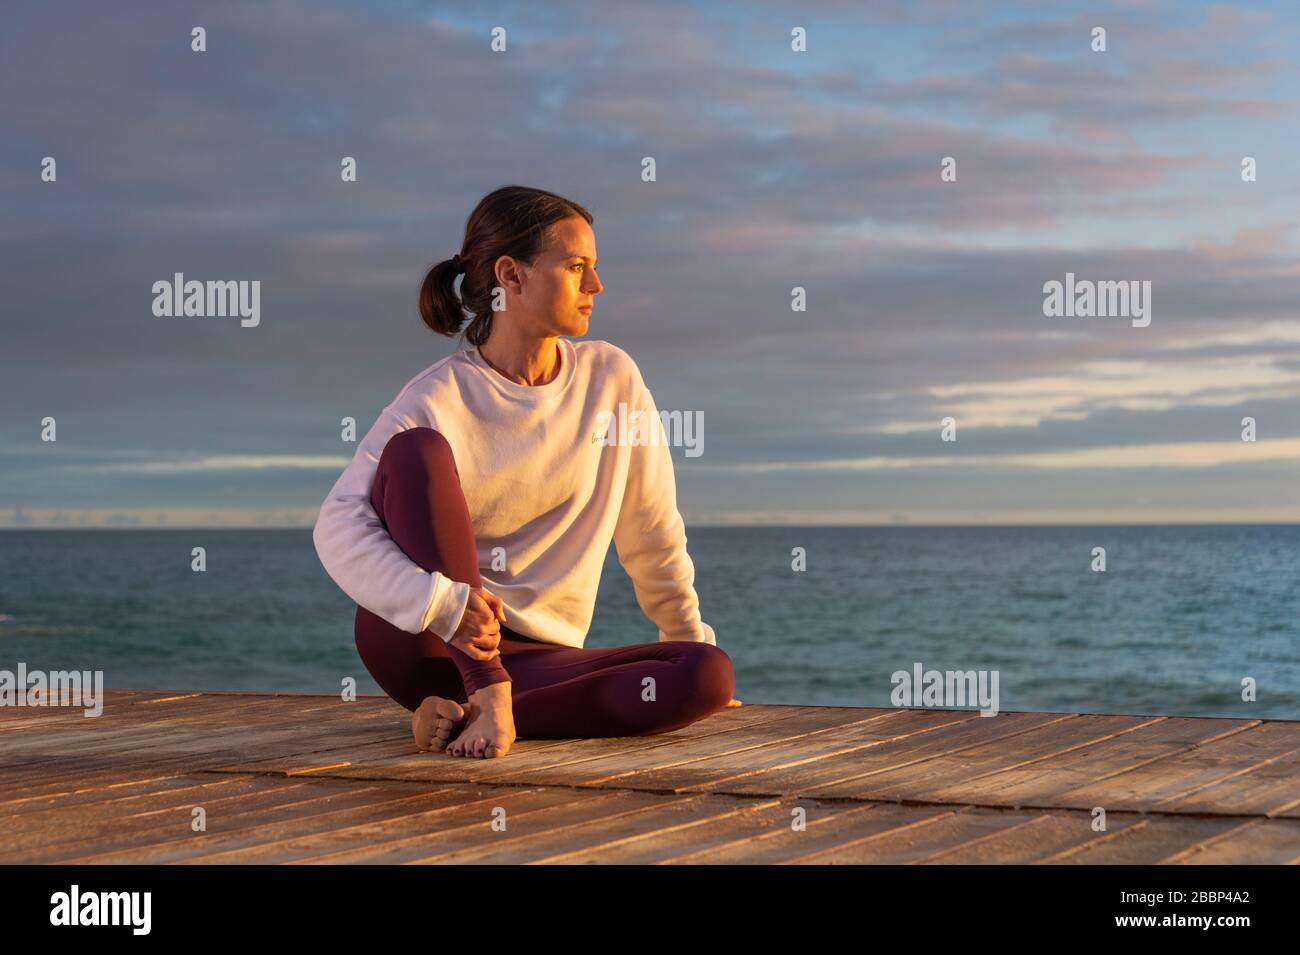 sporty woman sitting by the ocean at sunset, alone, thinking, Stock Photo